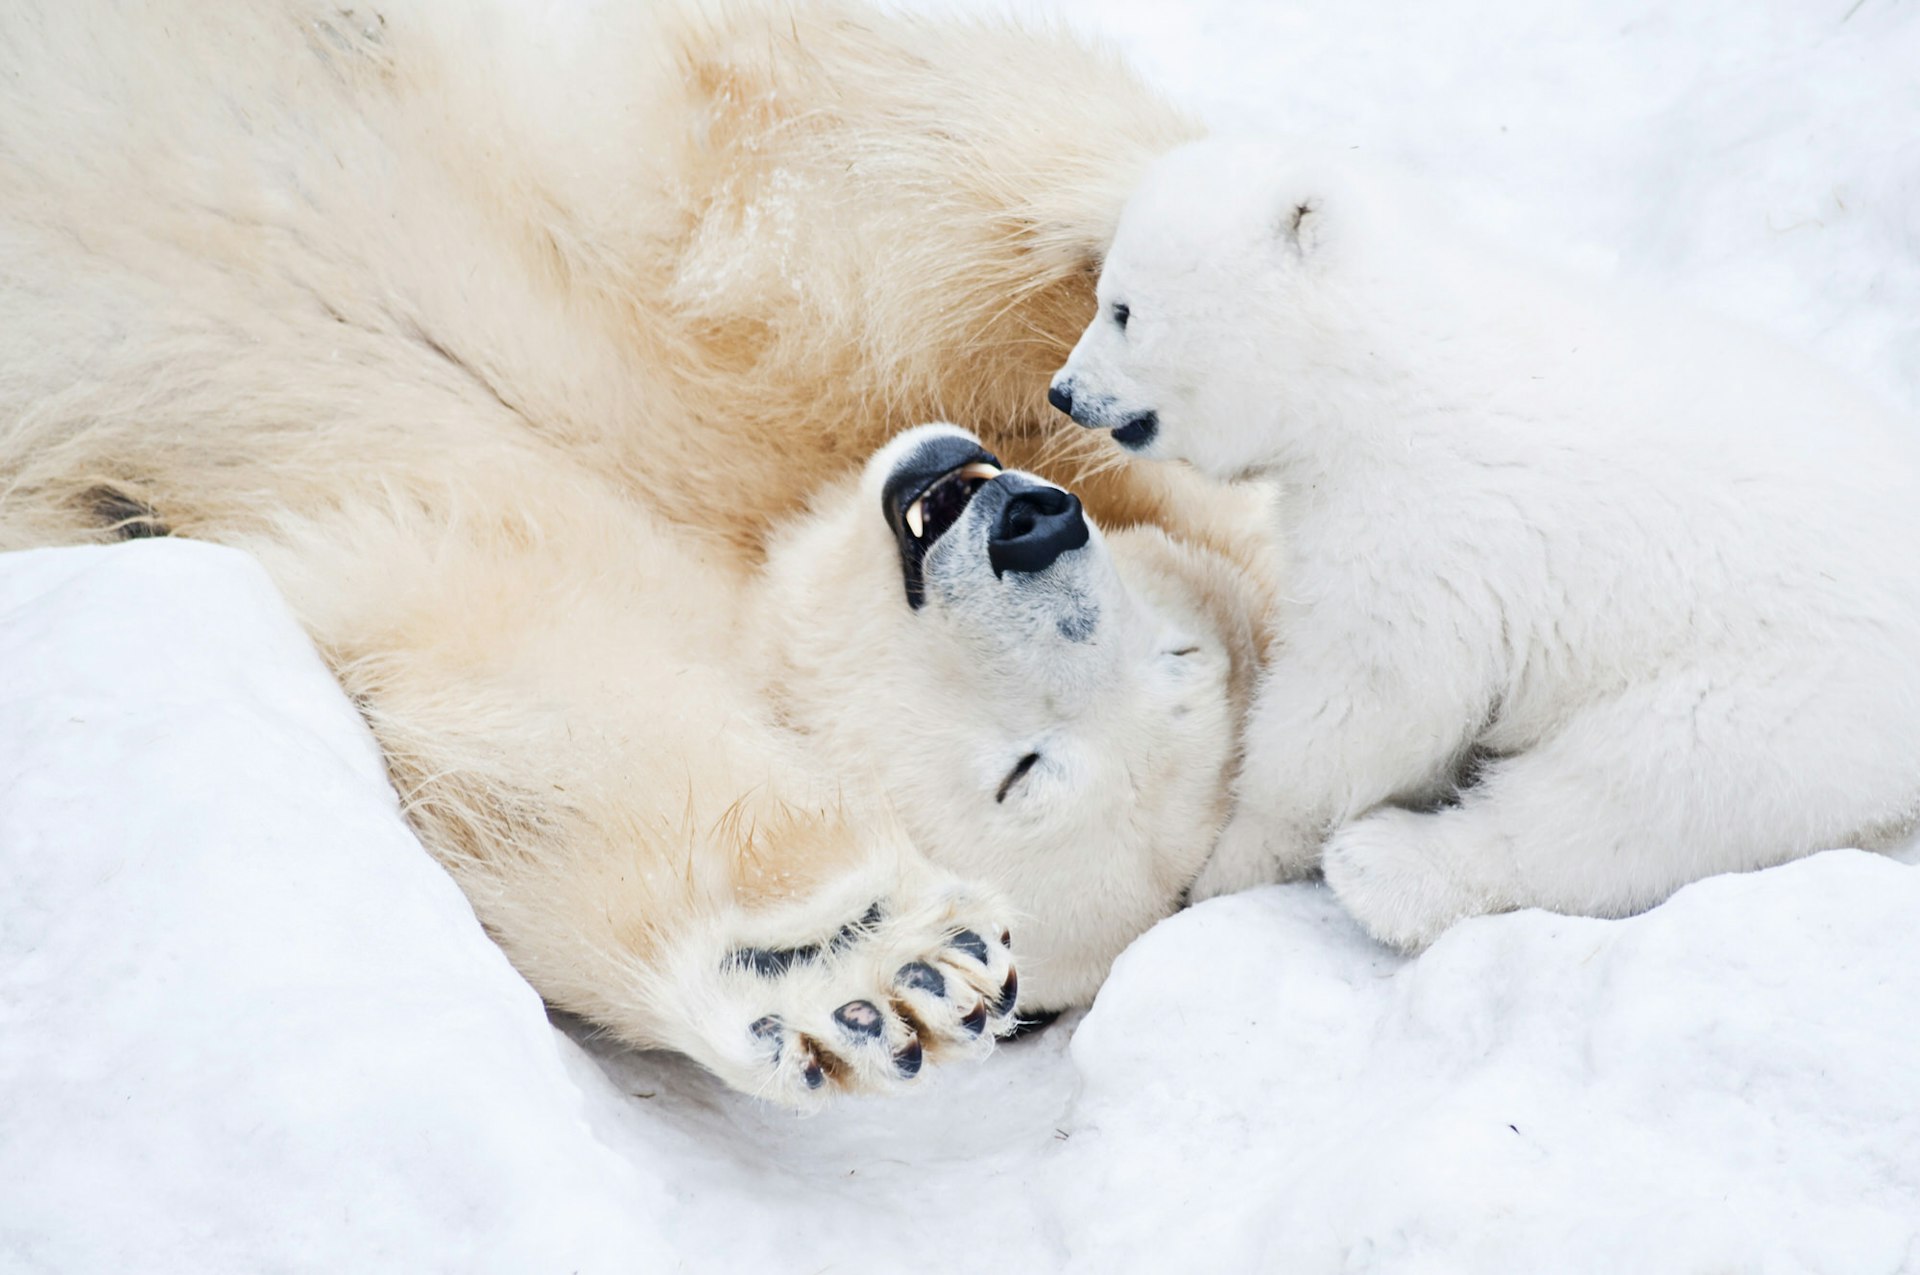 An adult polar bear and its pup play in the snow